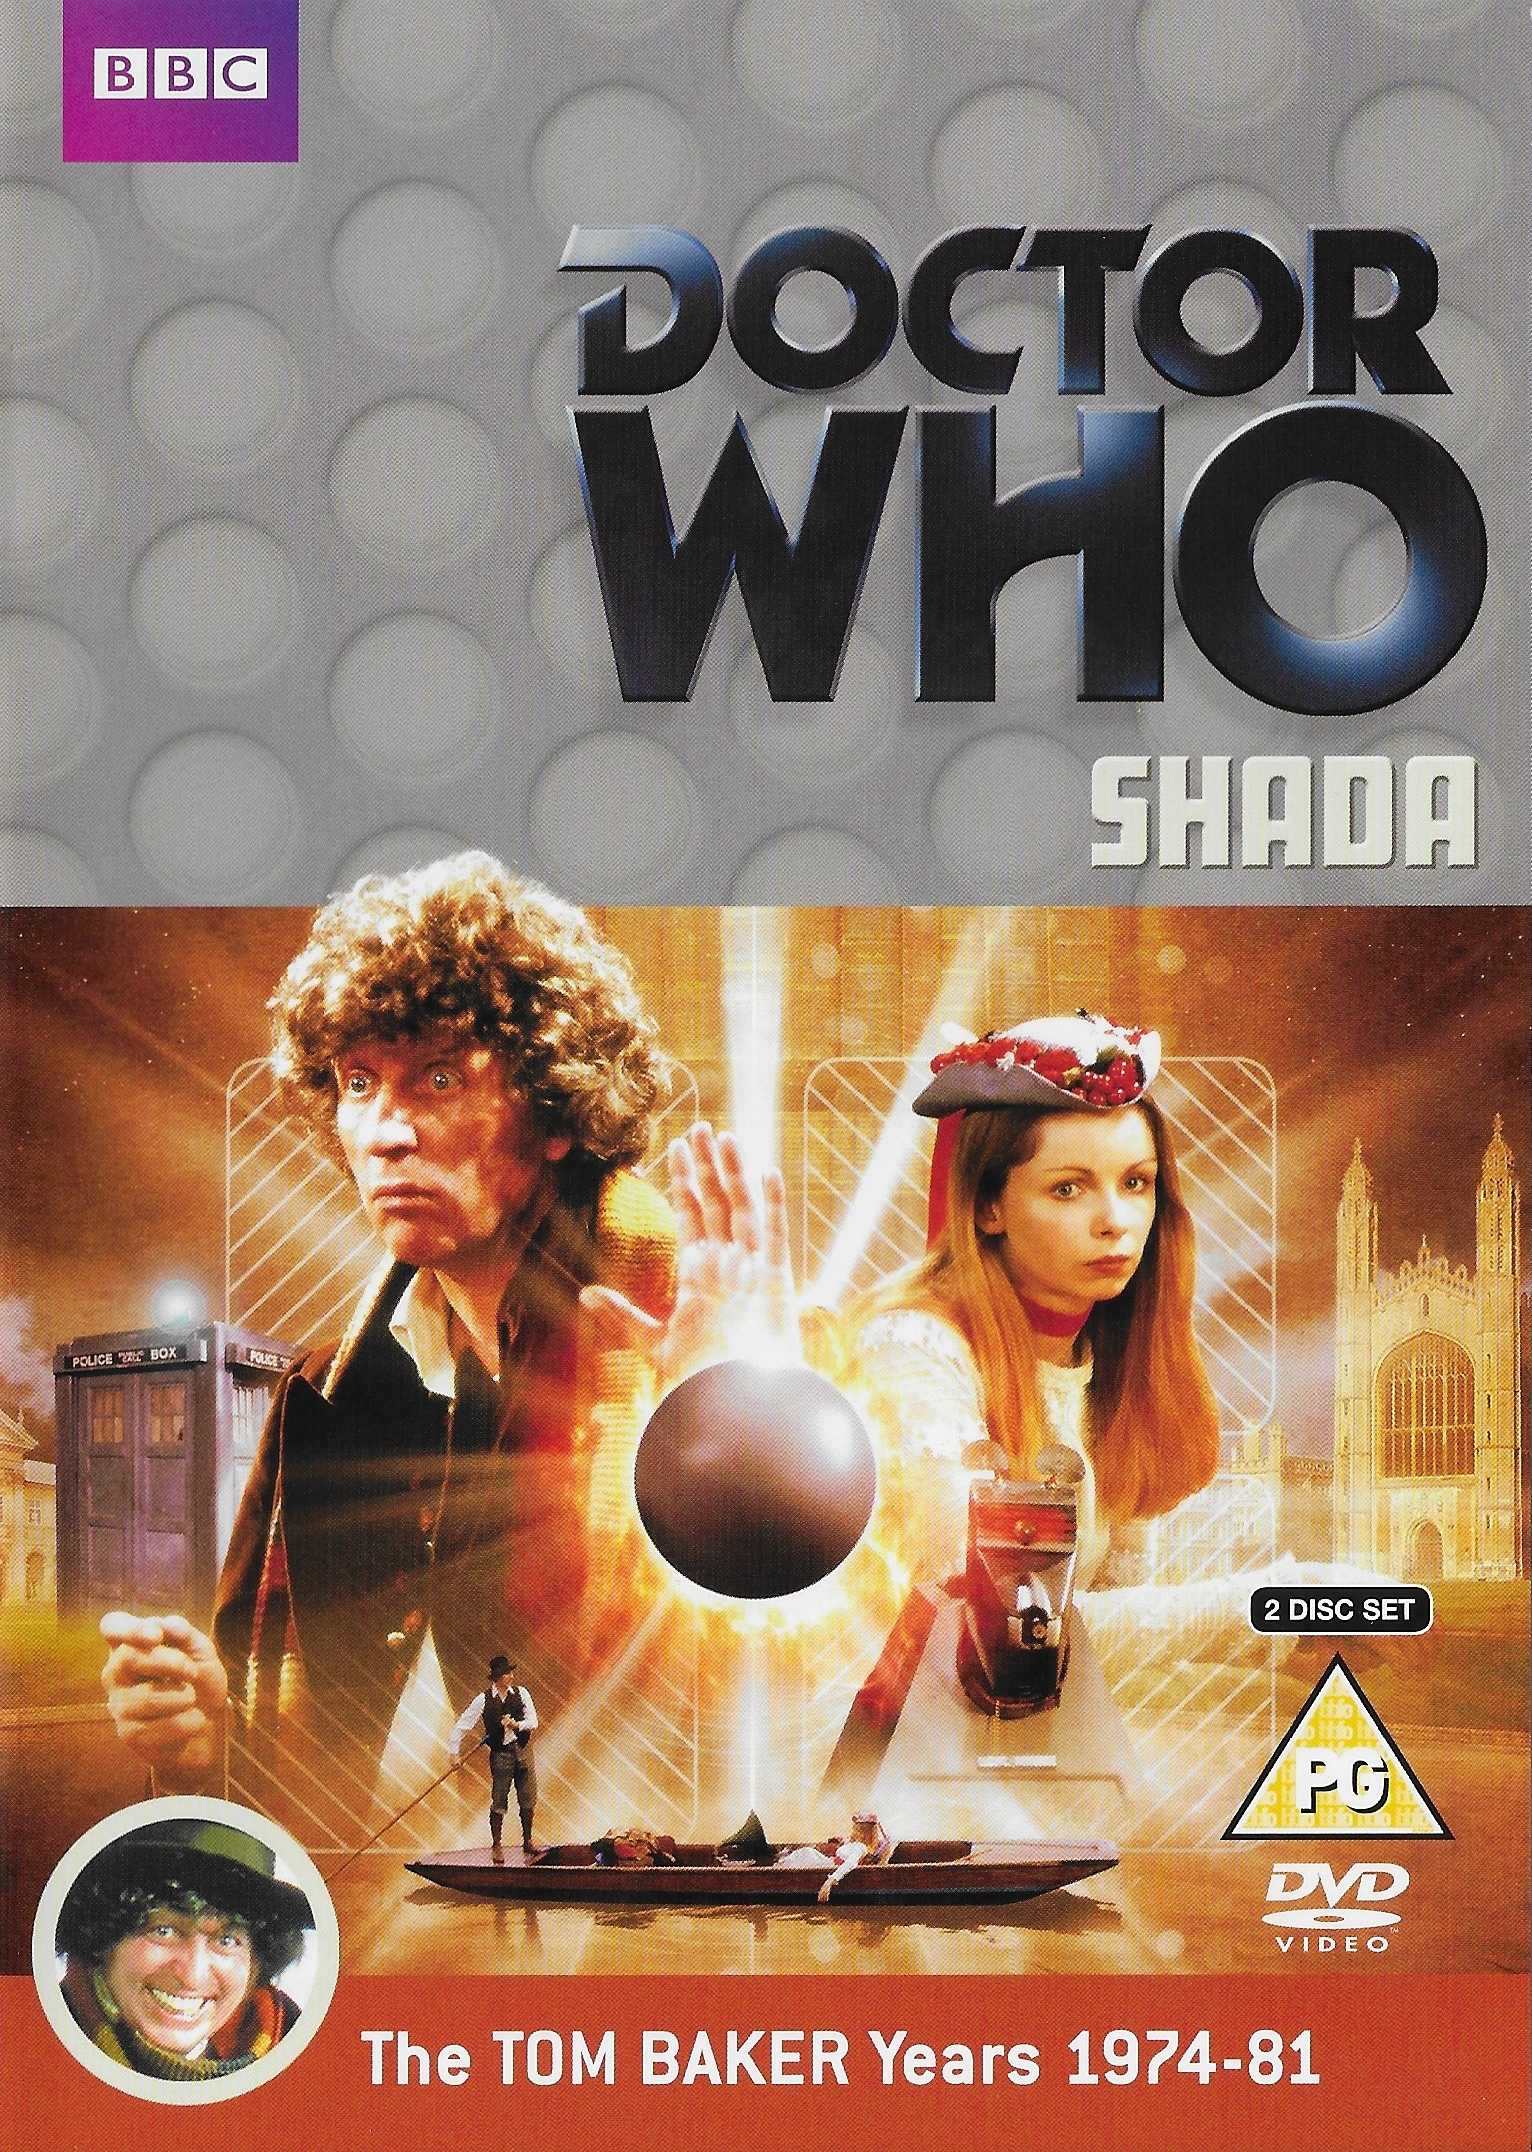 Picture of BBCDVD 3388A Doctor Who - Shada by artist Douglas Adams from the BBC dvds - Records and Tapes library